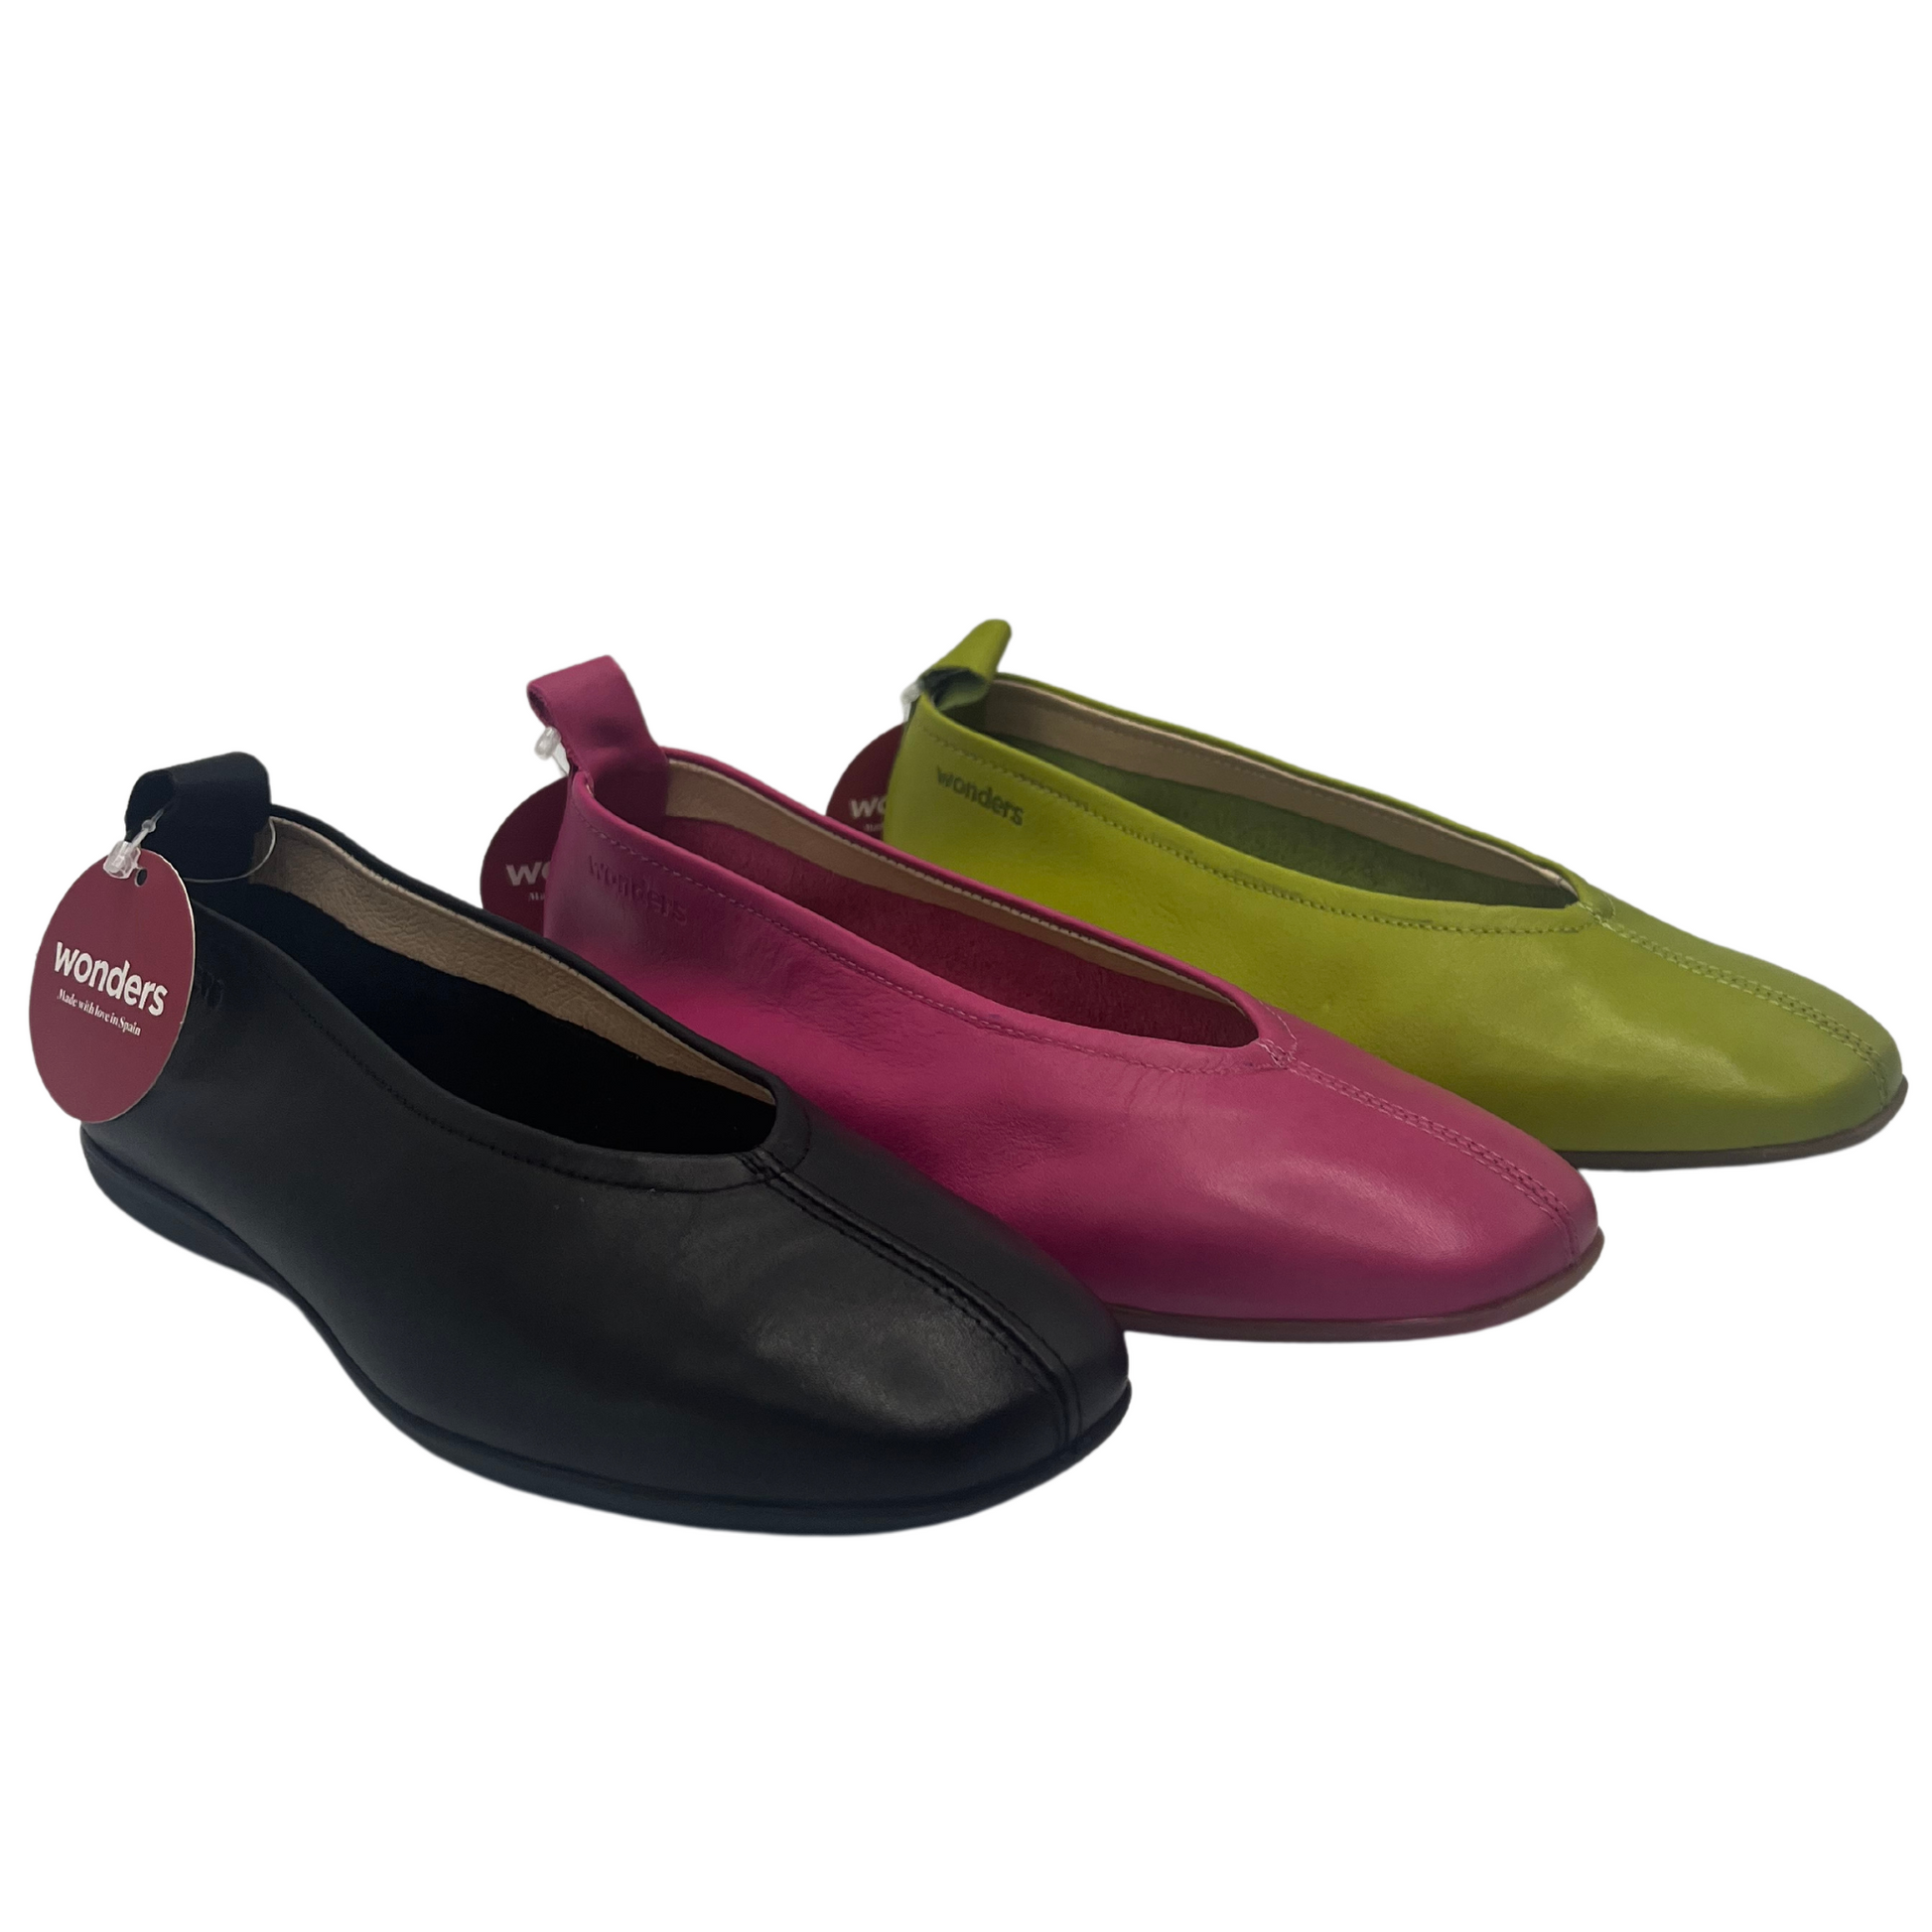 45 degree angled view of three ballet flats in a row. black, orchid and apple green. All have a leather upper and rubber outsole